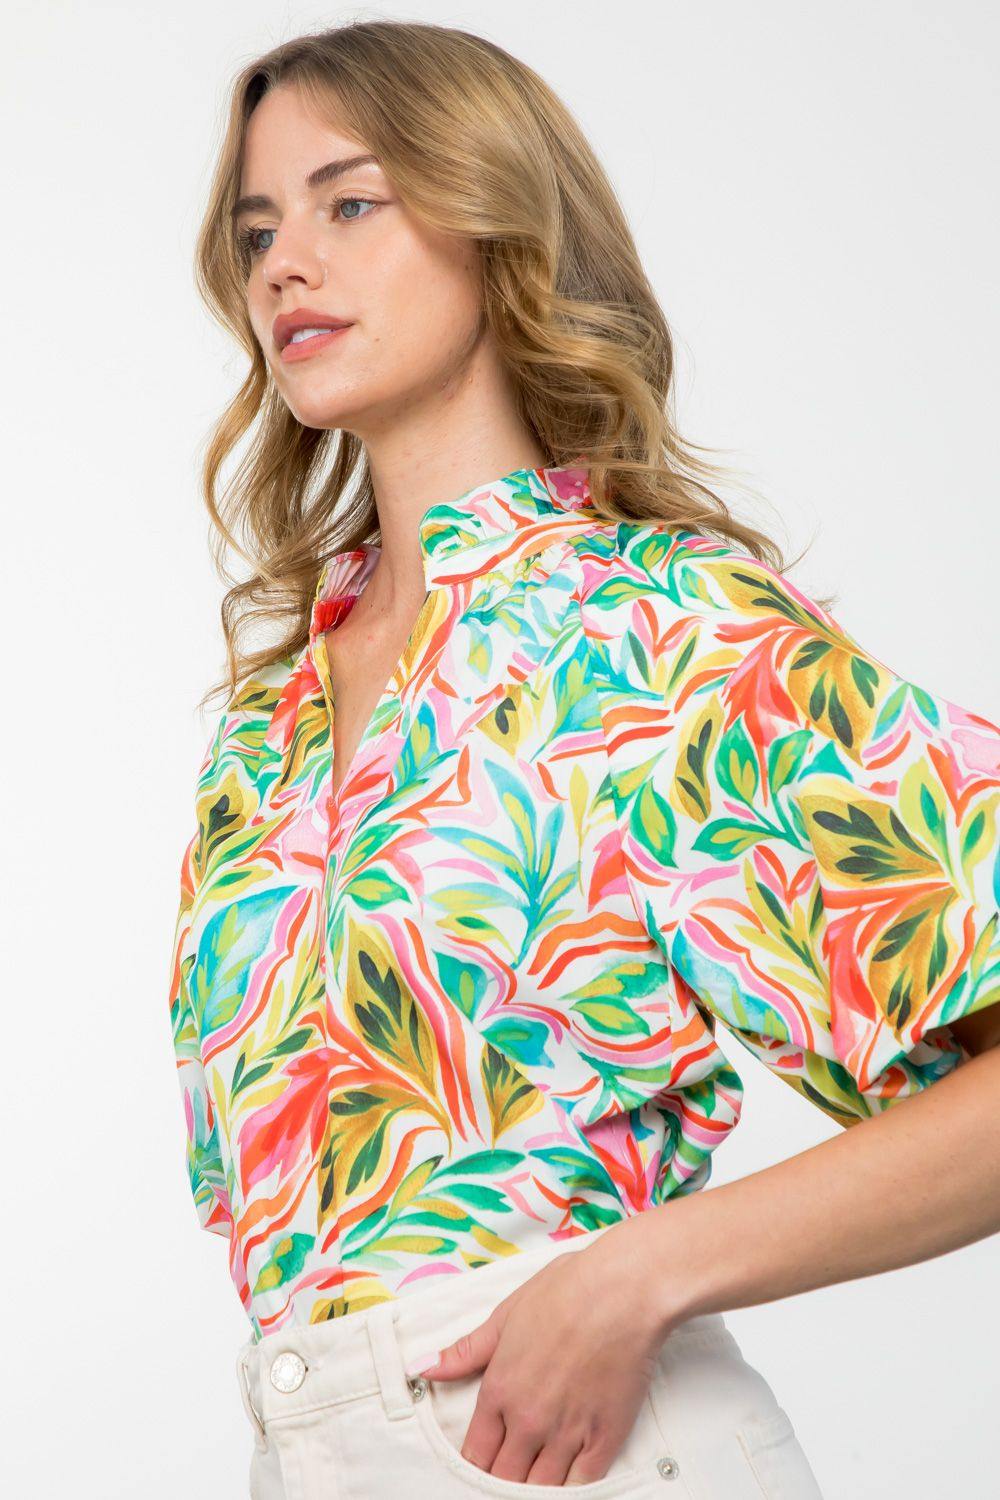 Floral Puff Blouse, THML Brand Tops and Dresses